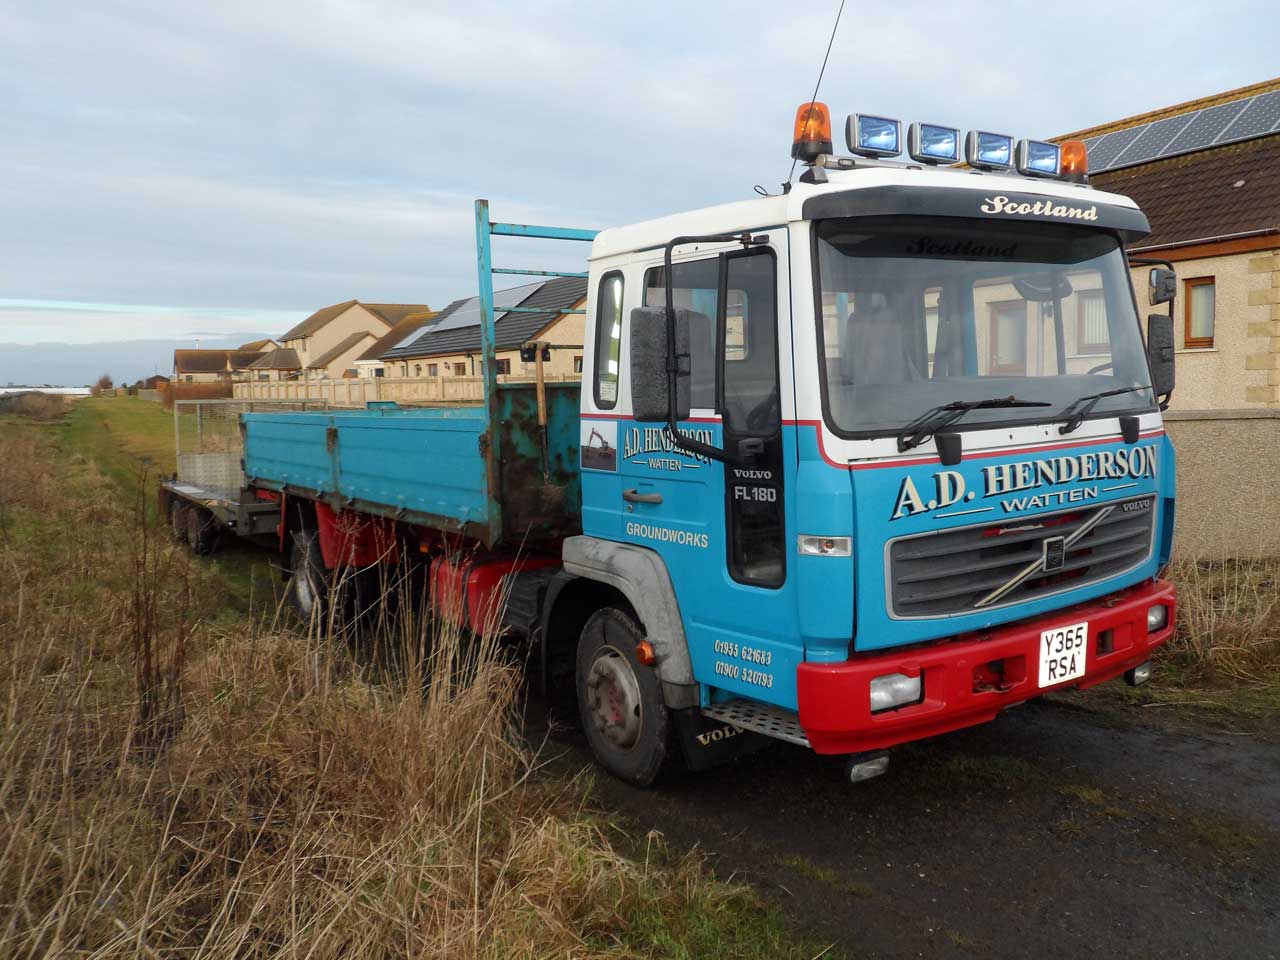 Photo: Vehicles in Caithness 2018